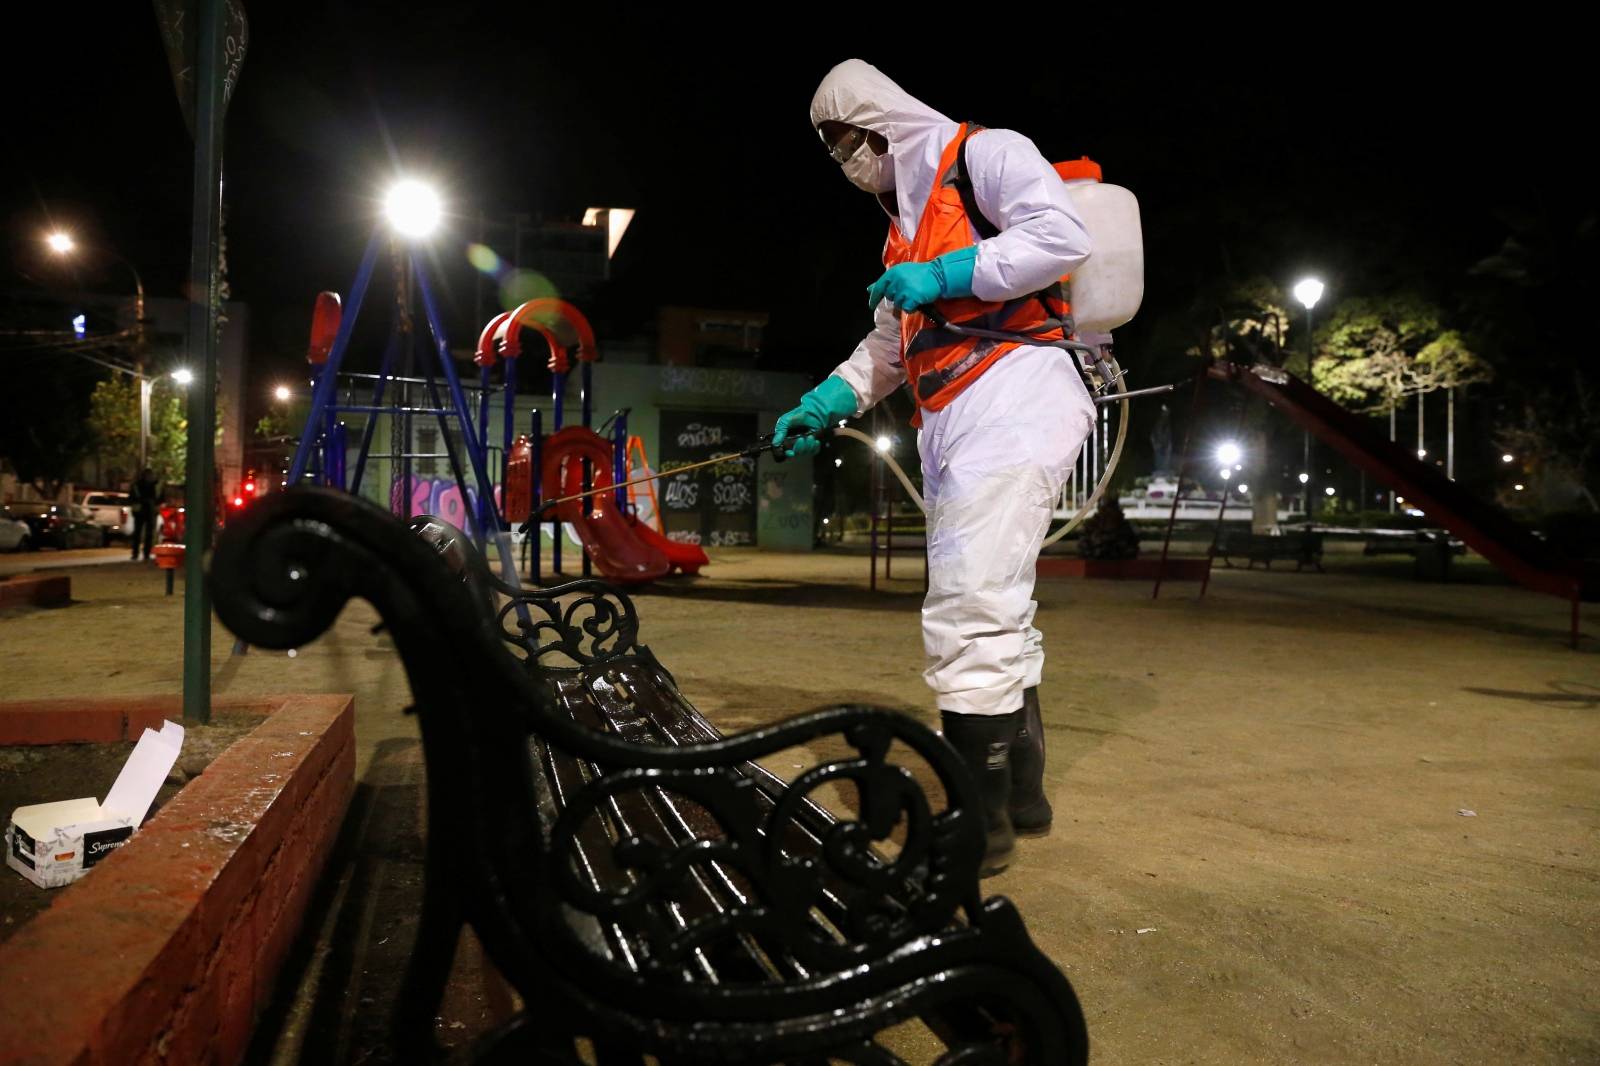 Local workers clean the streets as a precautionary measure, amid the coronavirus disease (COVID-19) outbreak, in Vina del Mar